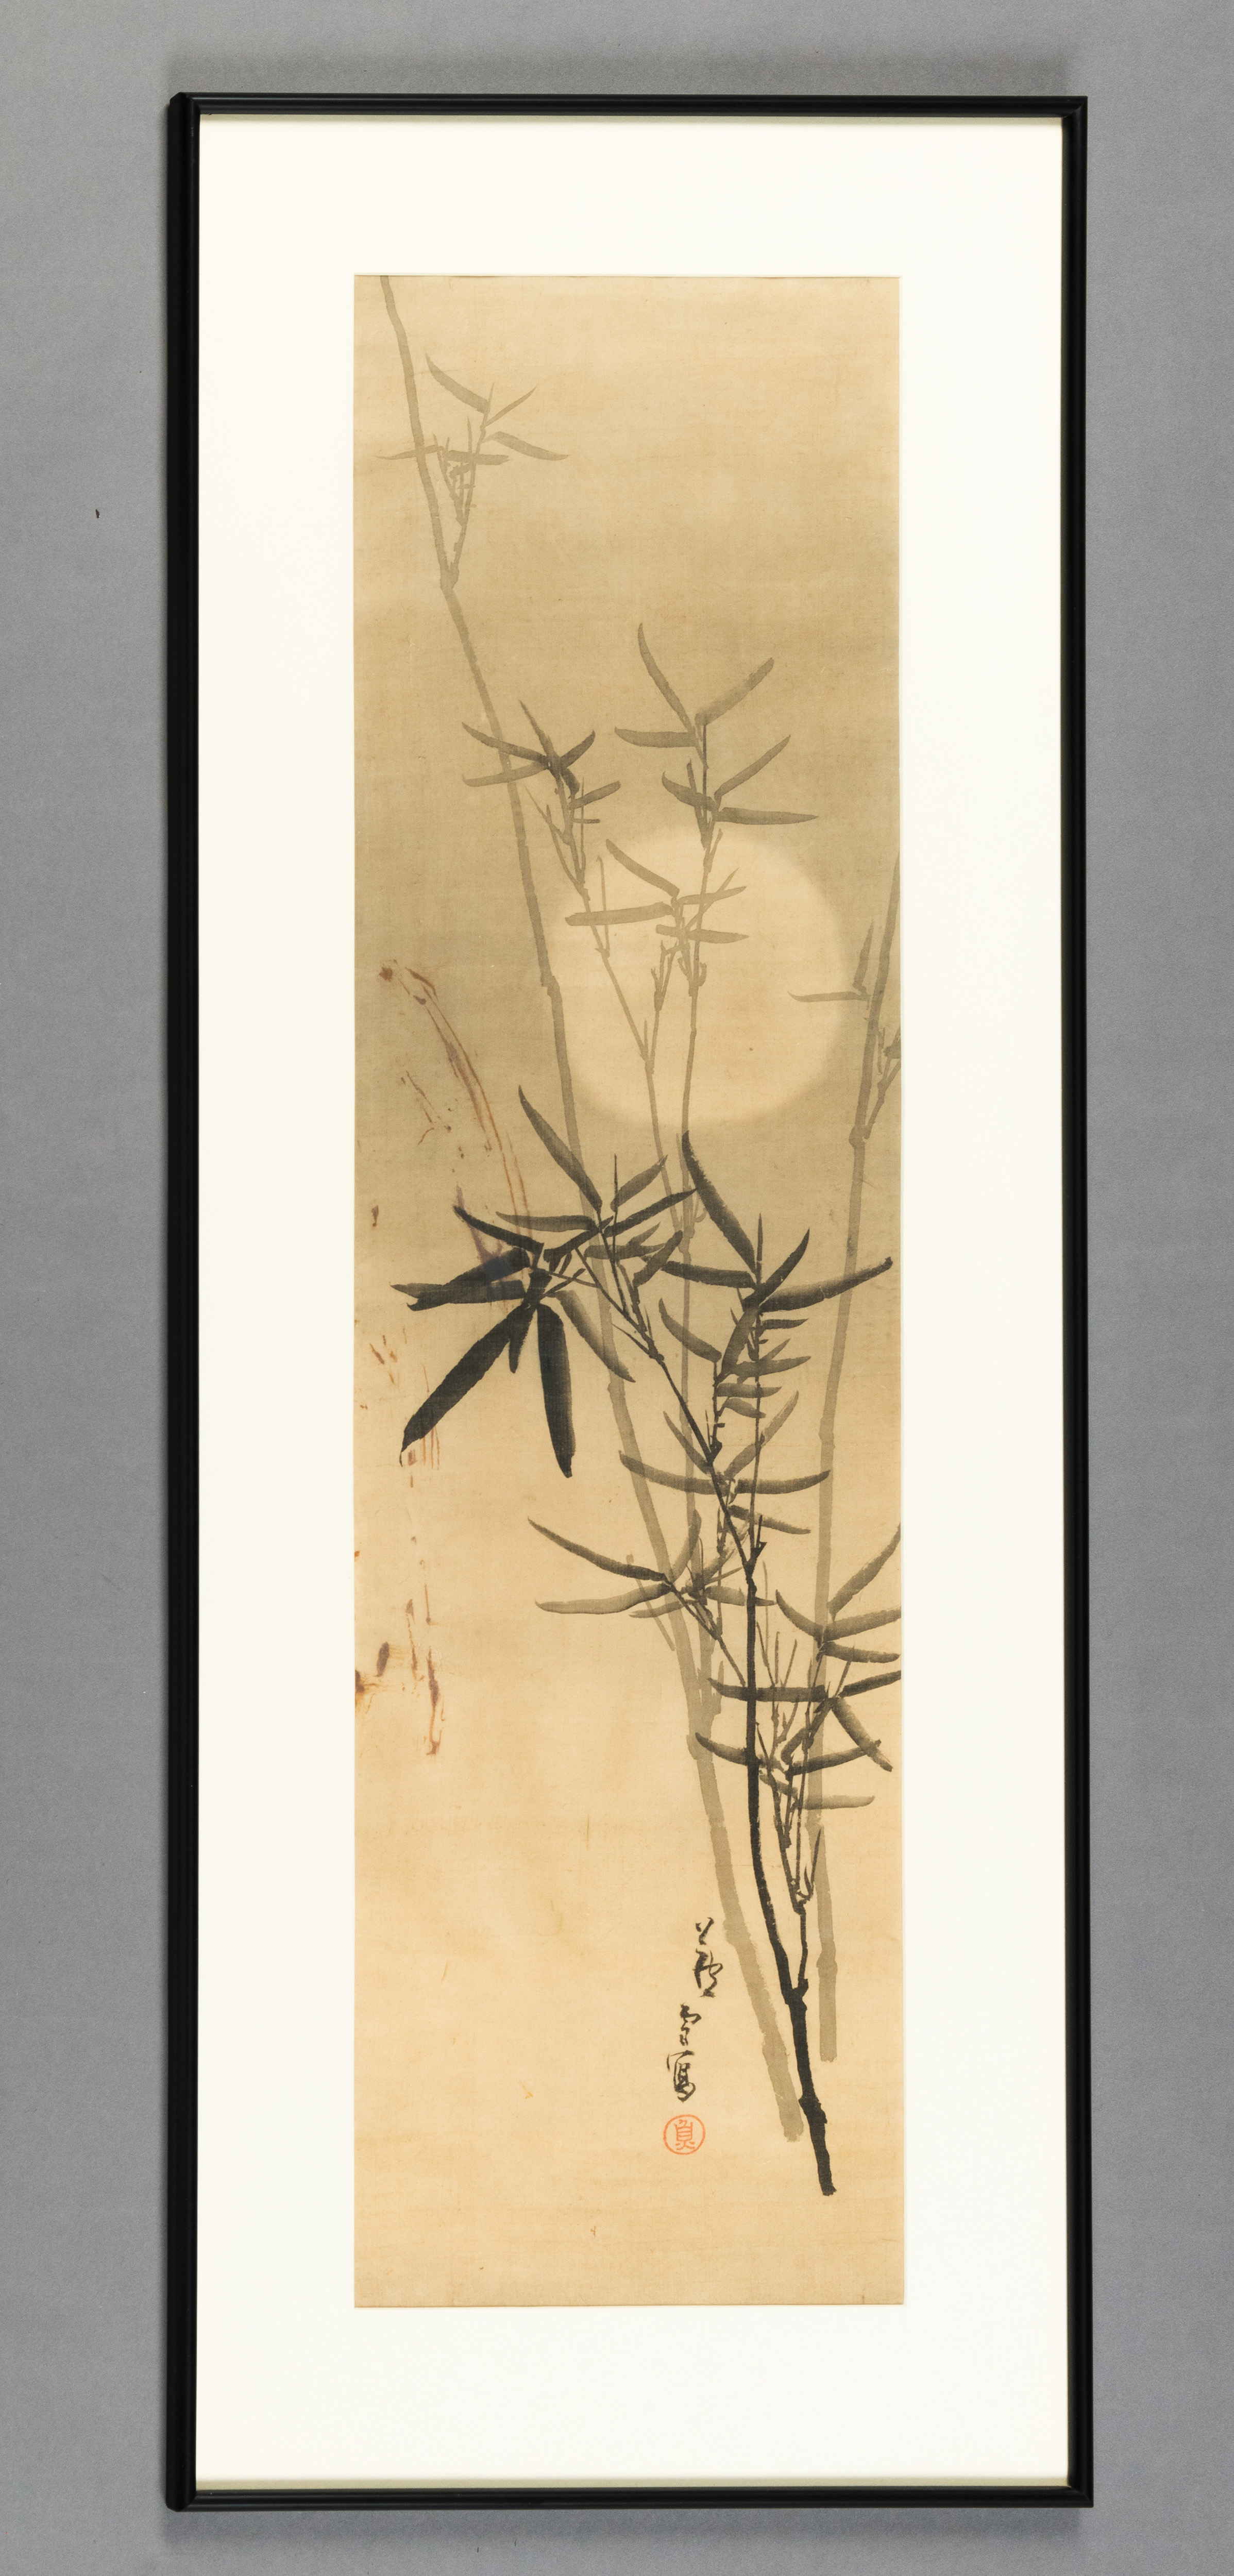 IN THE STYLE OF NAGASAWA RÔSETSU (1754-1799): BAMBOO UNDER A FULL MOON, INK ON SILK - Image 2 of 2